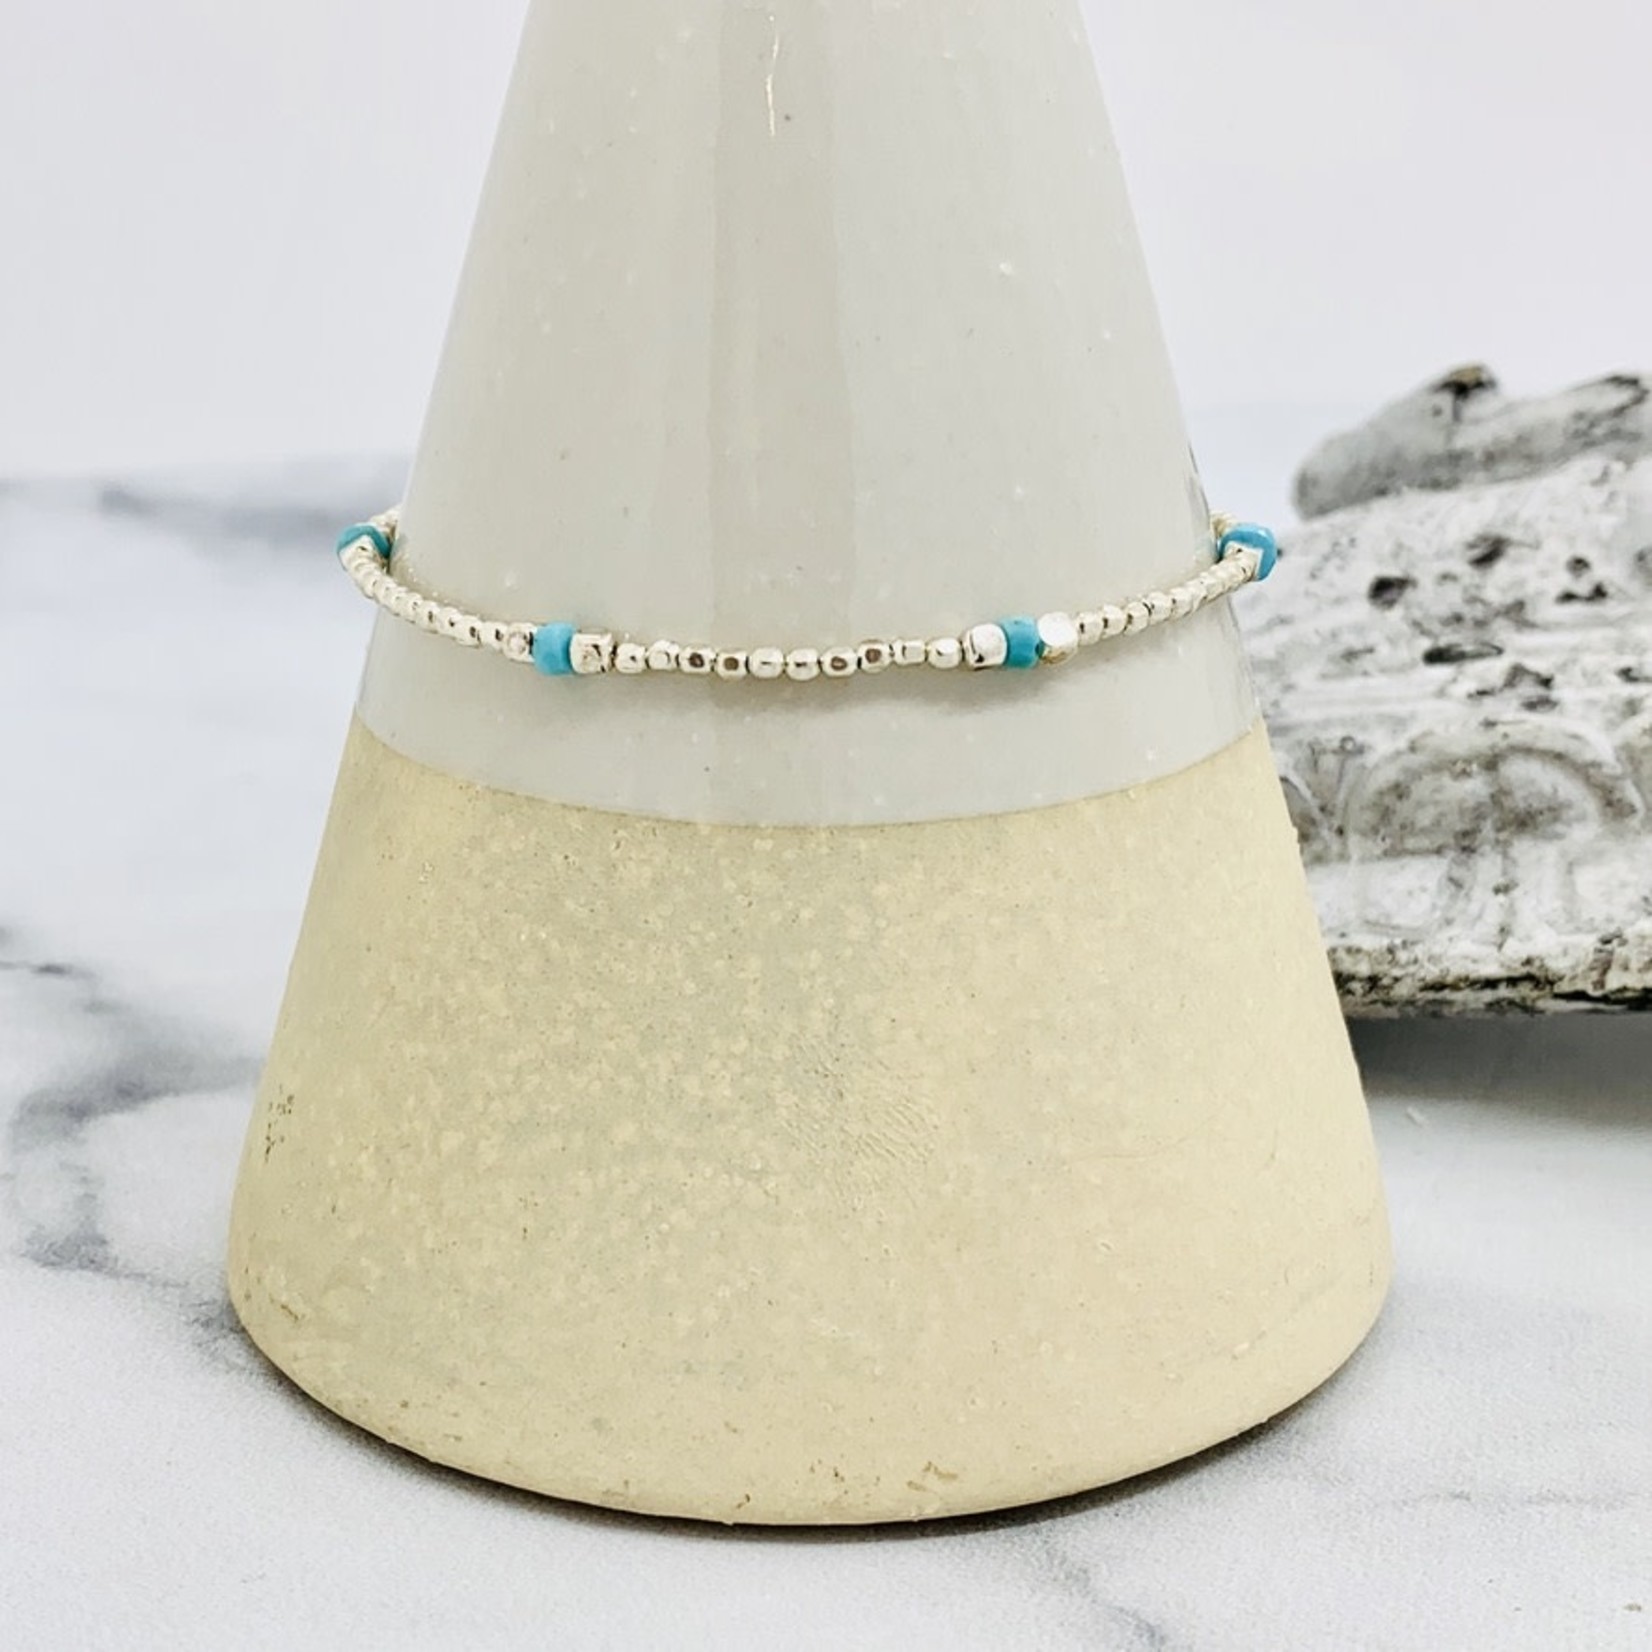 Handmade Sterling Silver and Sleeping Beauty Turquoise Bracelet